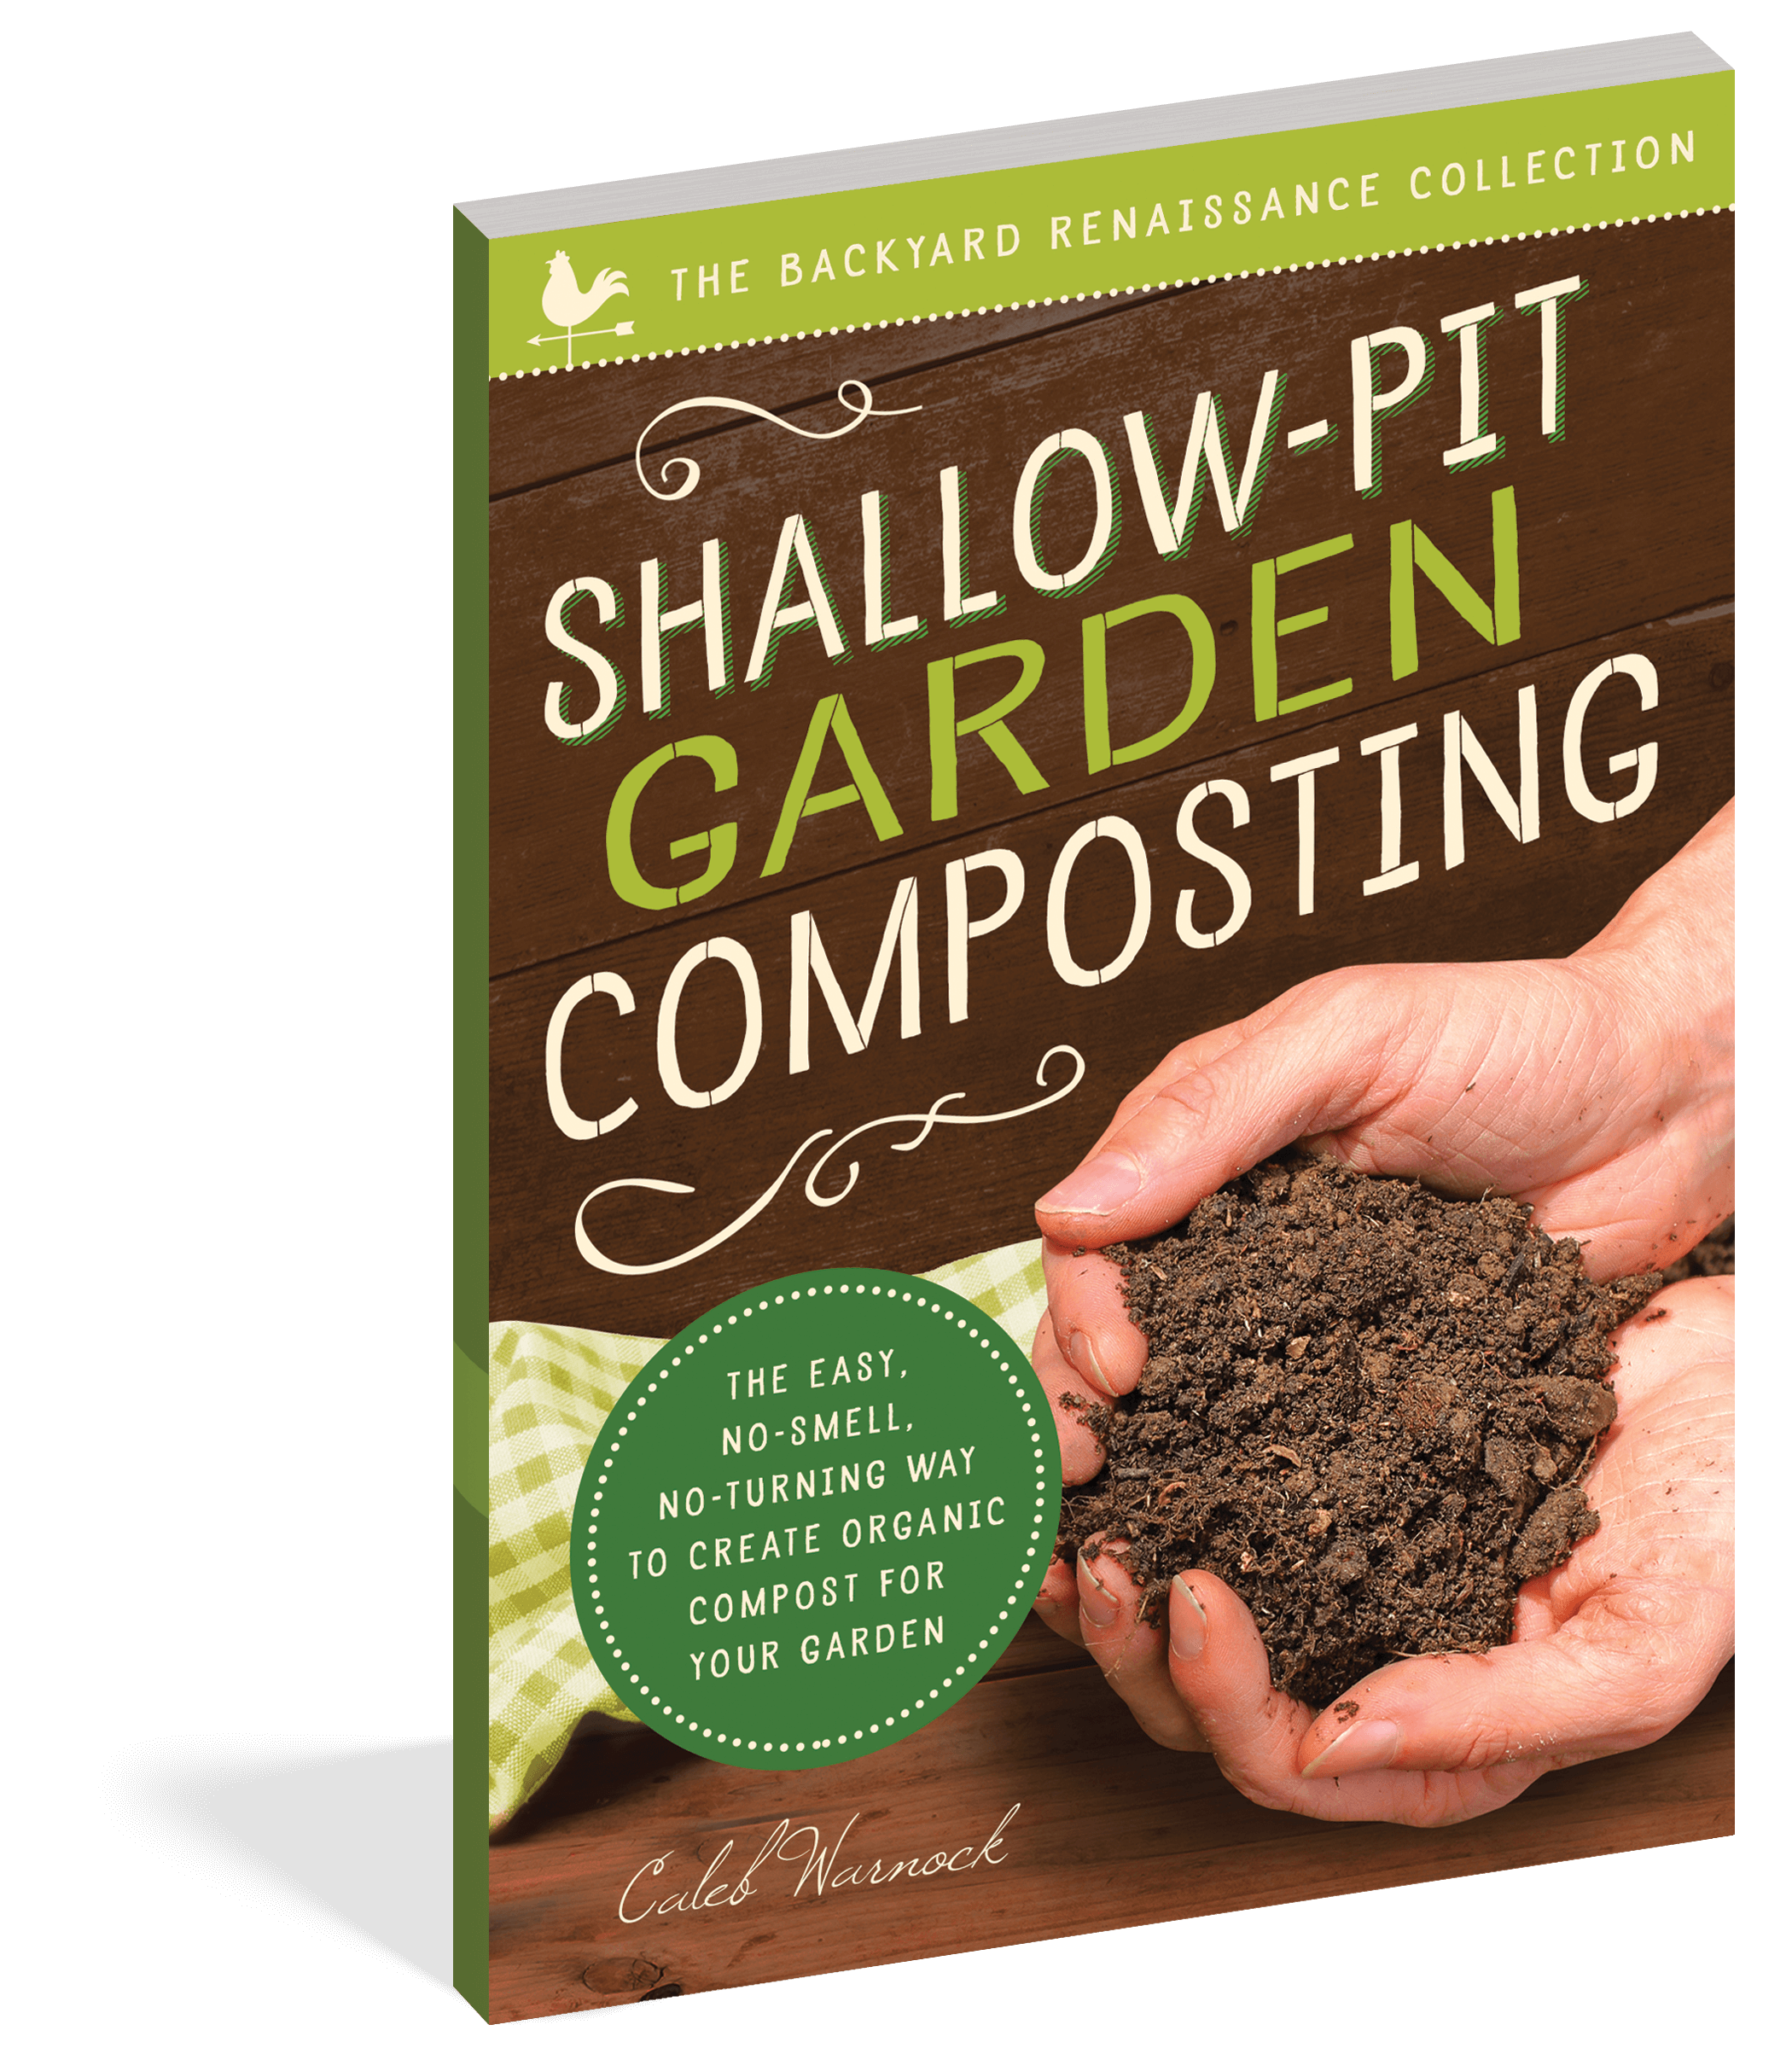 The cover of the book Shallow-Pit Garden Composting.